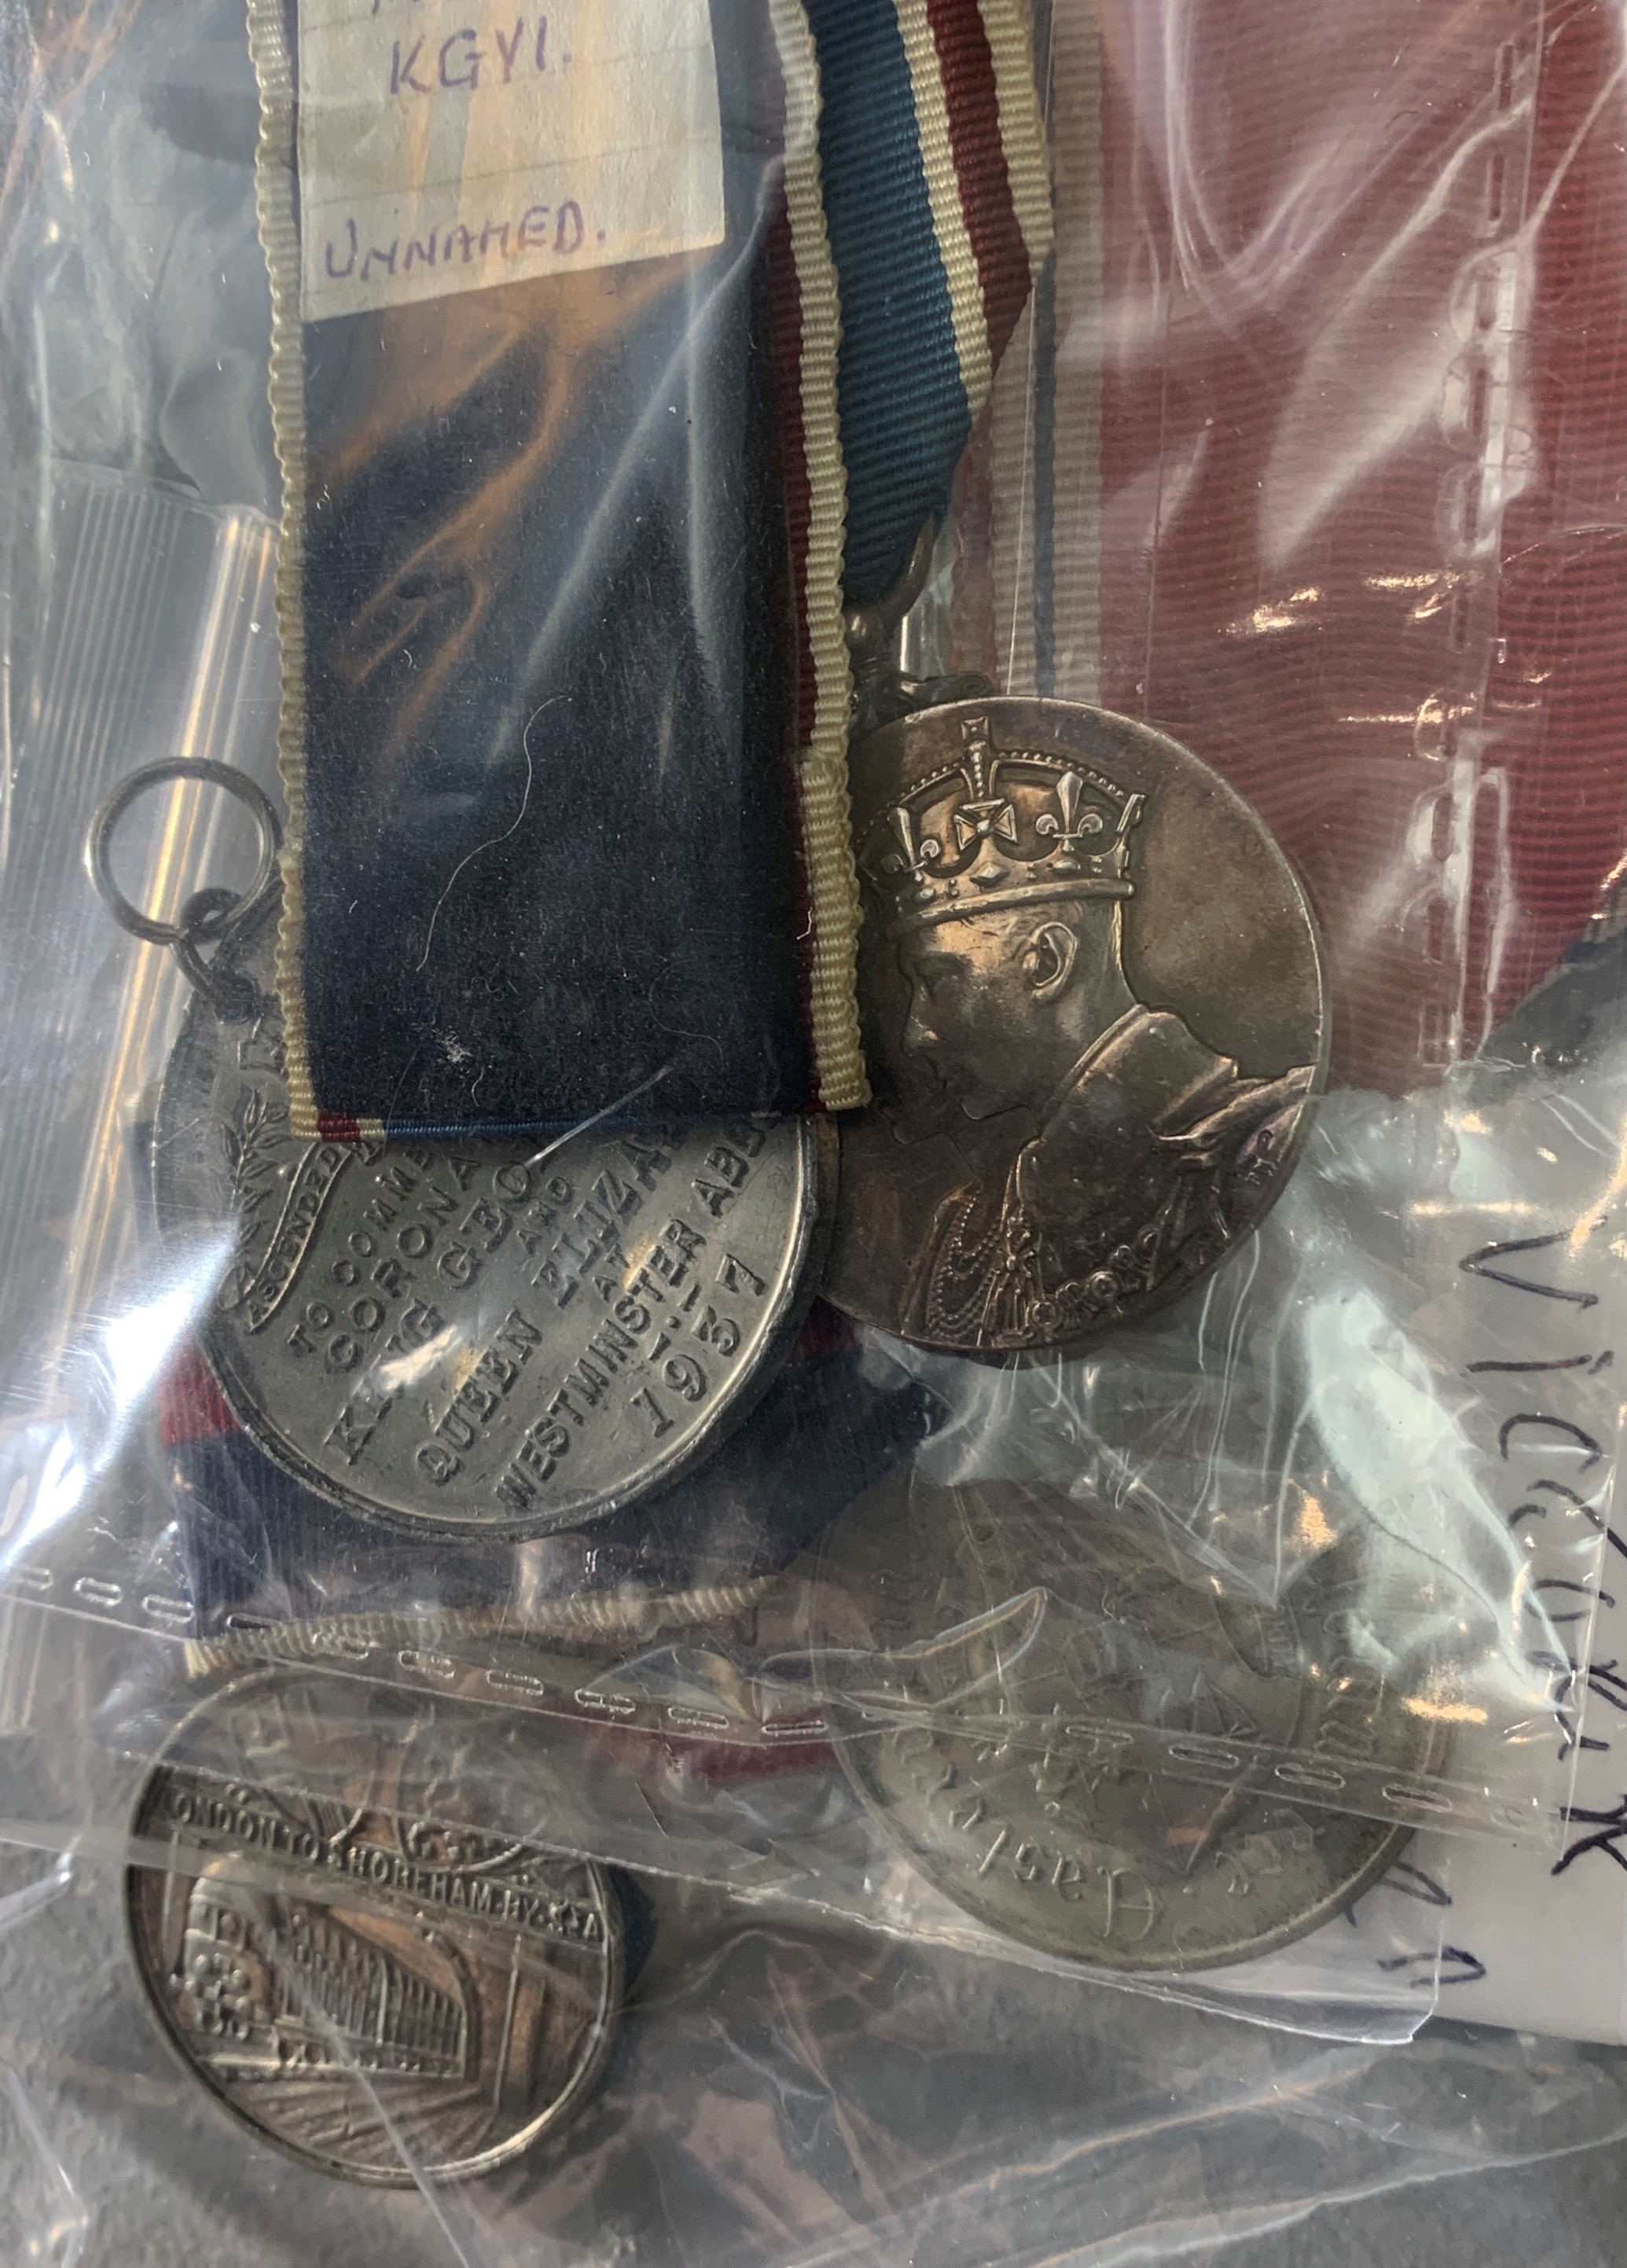 Commemorative Royalty Related Medals - (4) & Railway Interest (1):